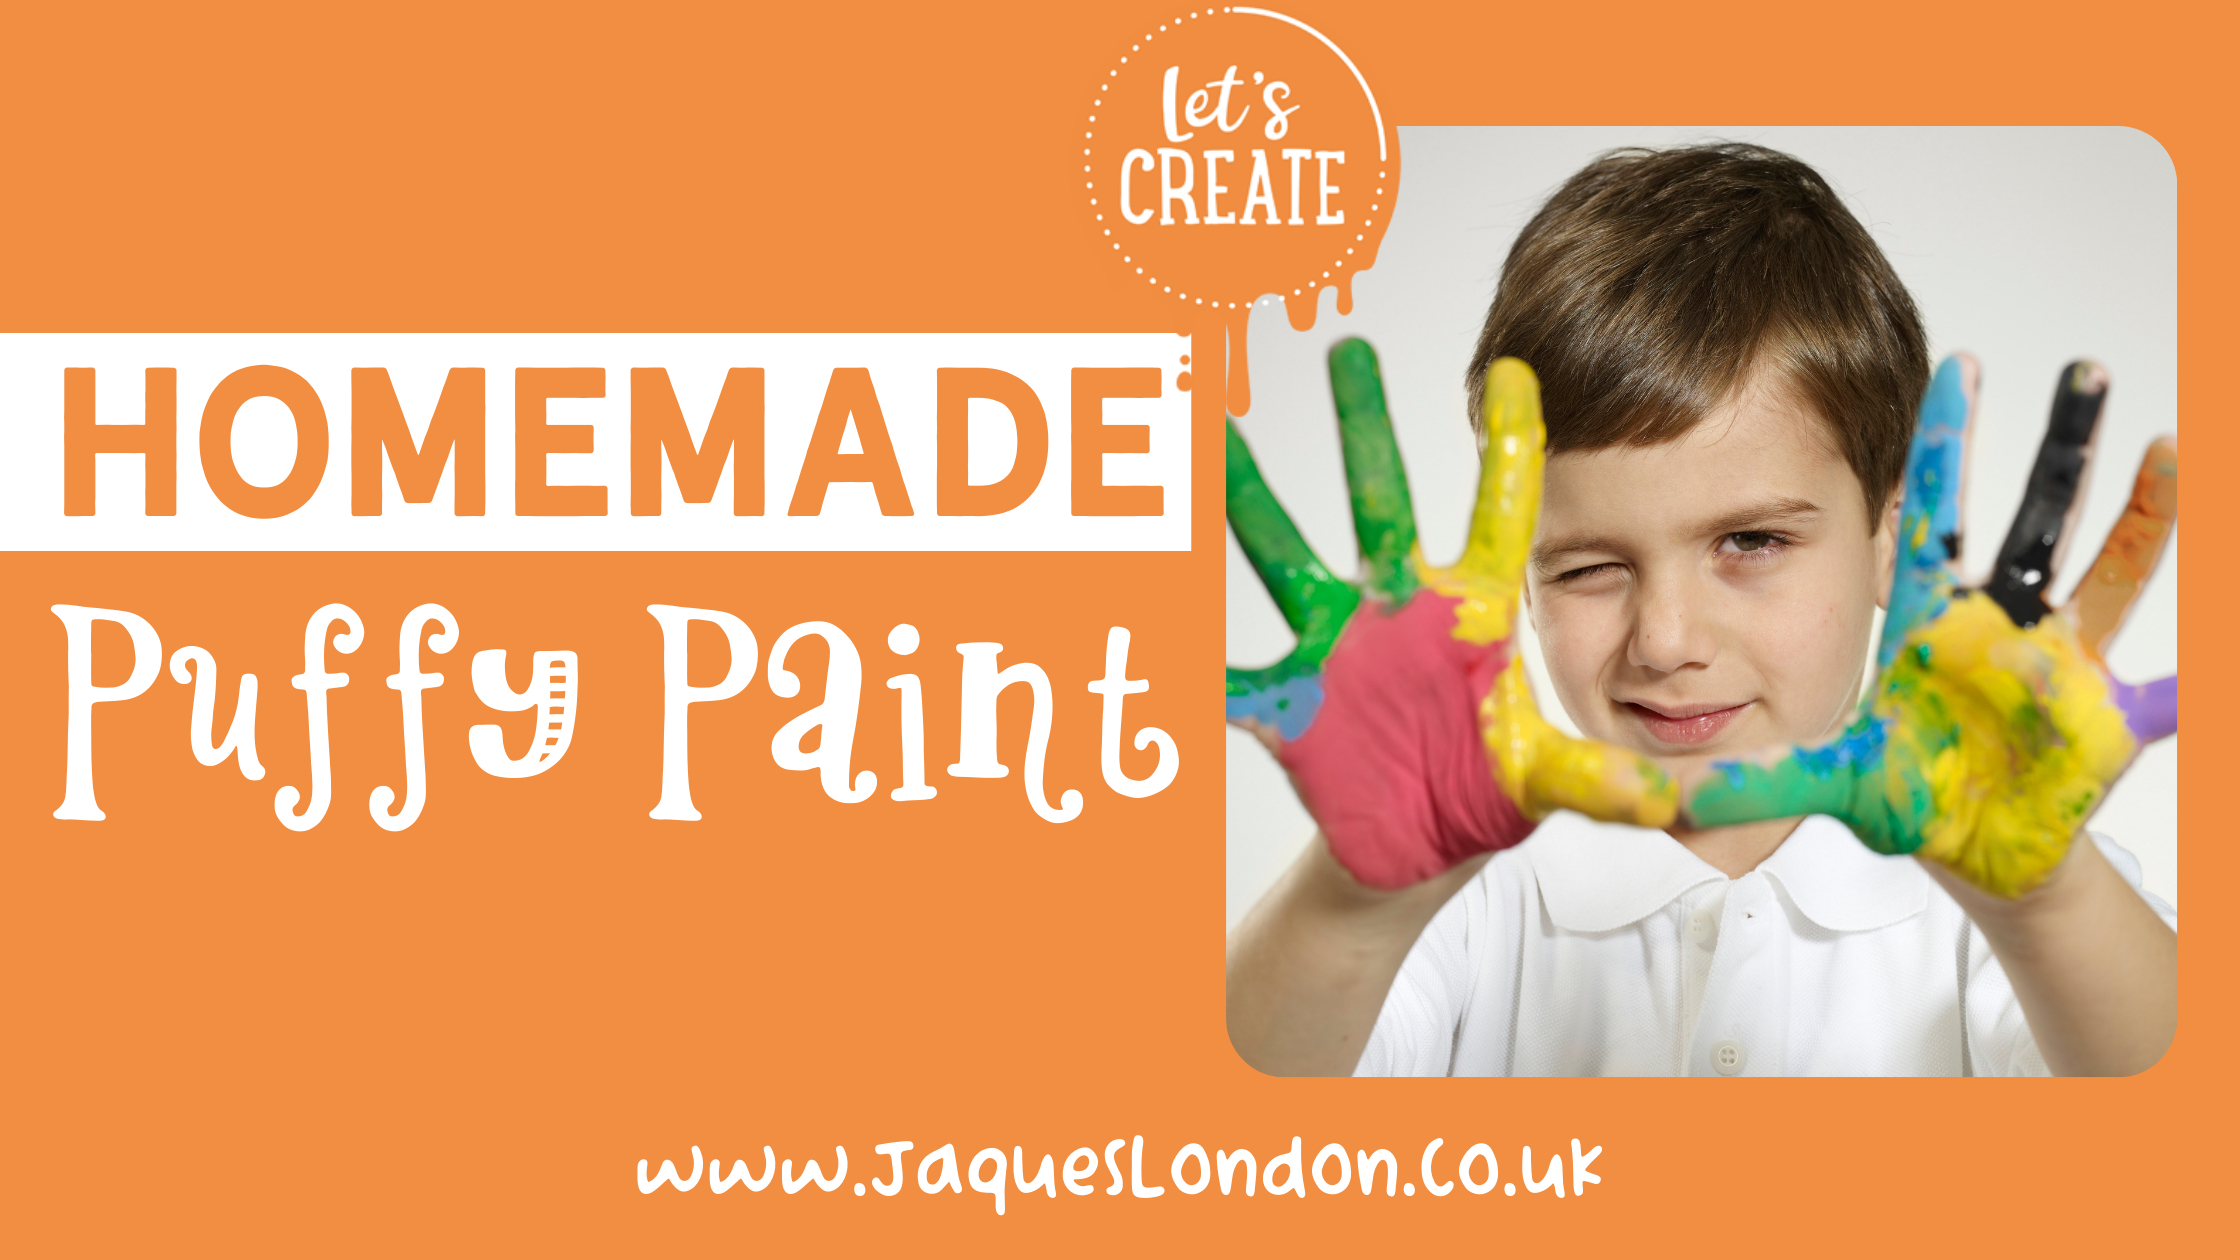 How to Make Puffy Paint for Kids